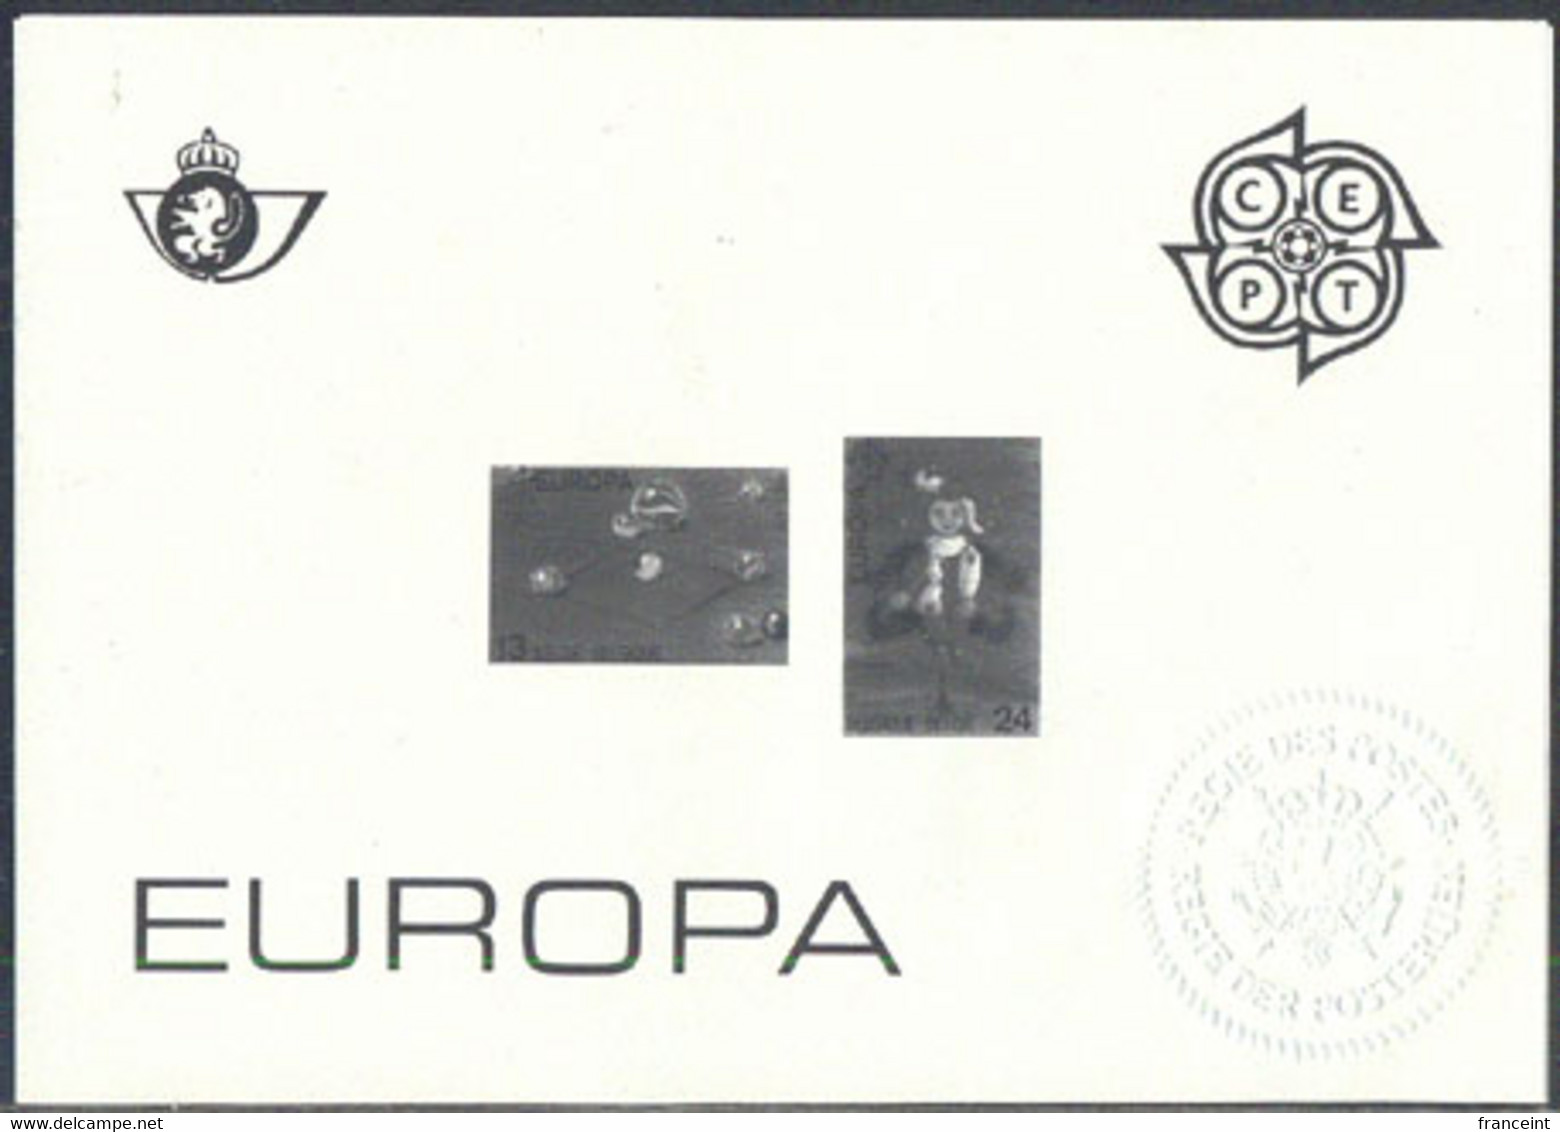 BELGIUM (1989) Marbles. Jumping Jack. Monochrome Compound Proof Sheet With Ministerial Seal. Scott Nos 1312-3 - Proofs & Reprints